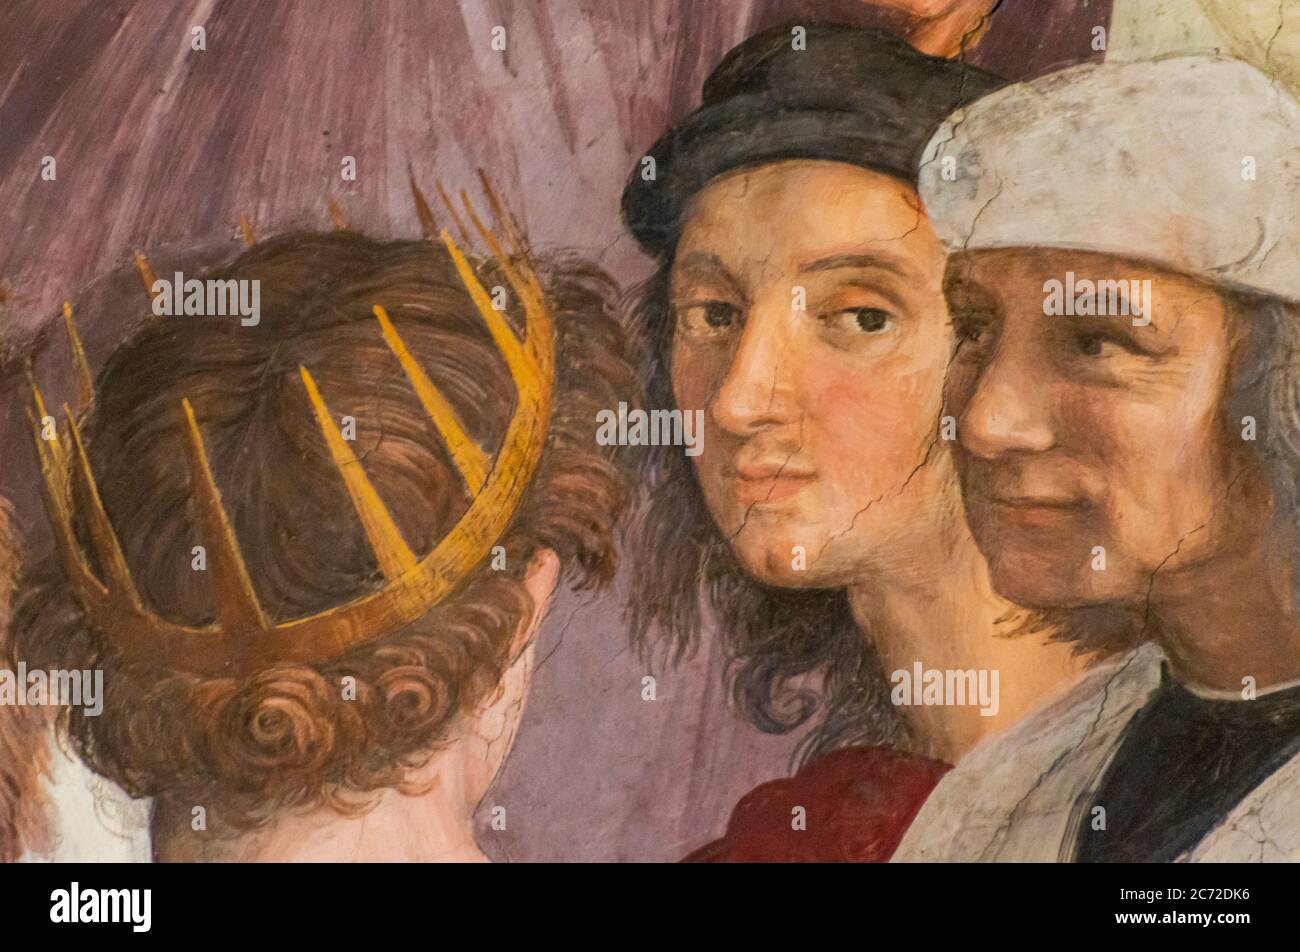 Detail of medieval painting showing the faces of two men who talk to a king wearing a crown Stock Photo